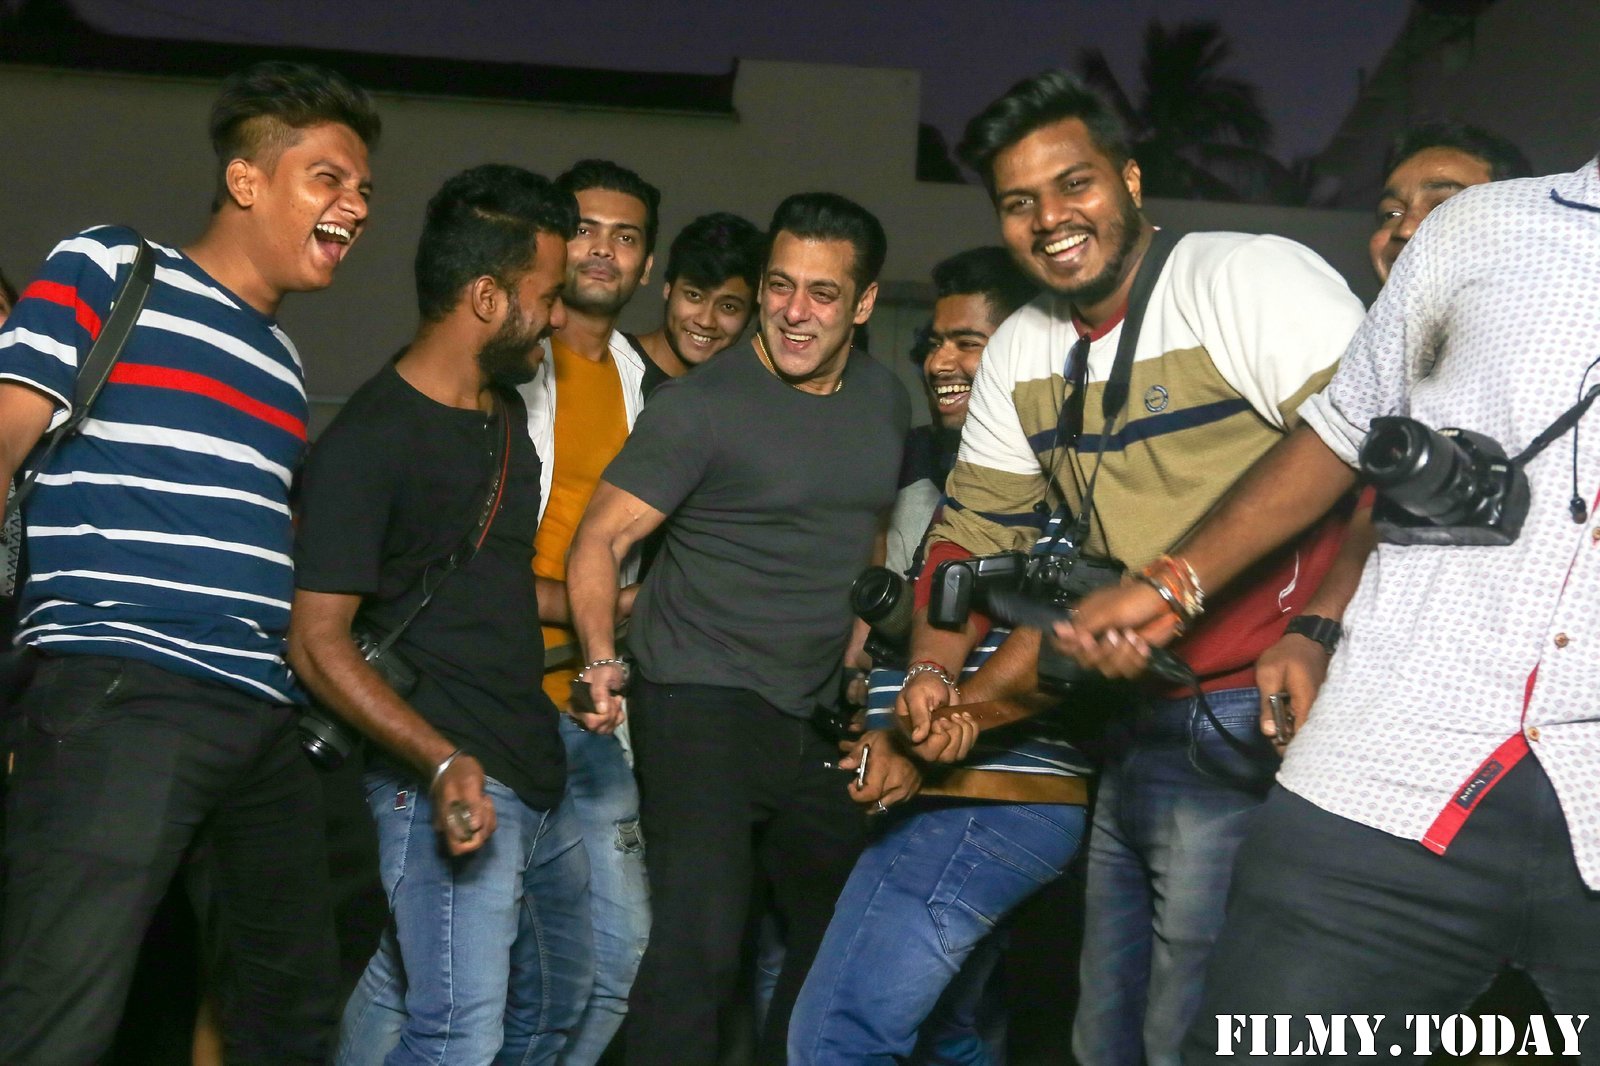 Photos: Promotion Of Film Dabangg 3 | Picture 1707752